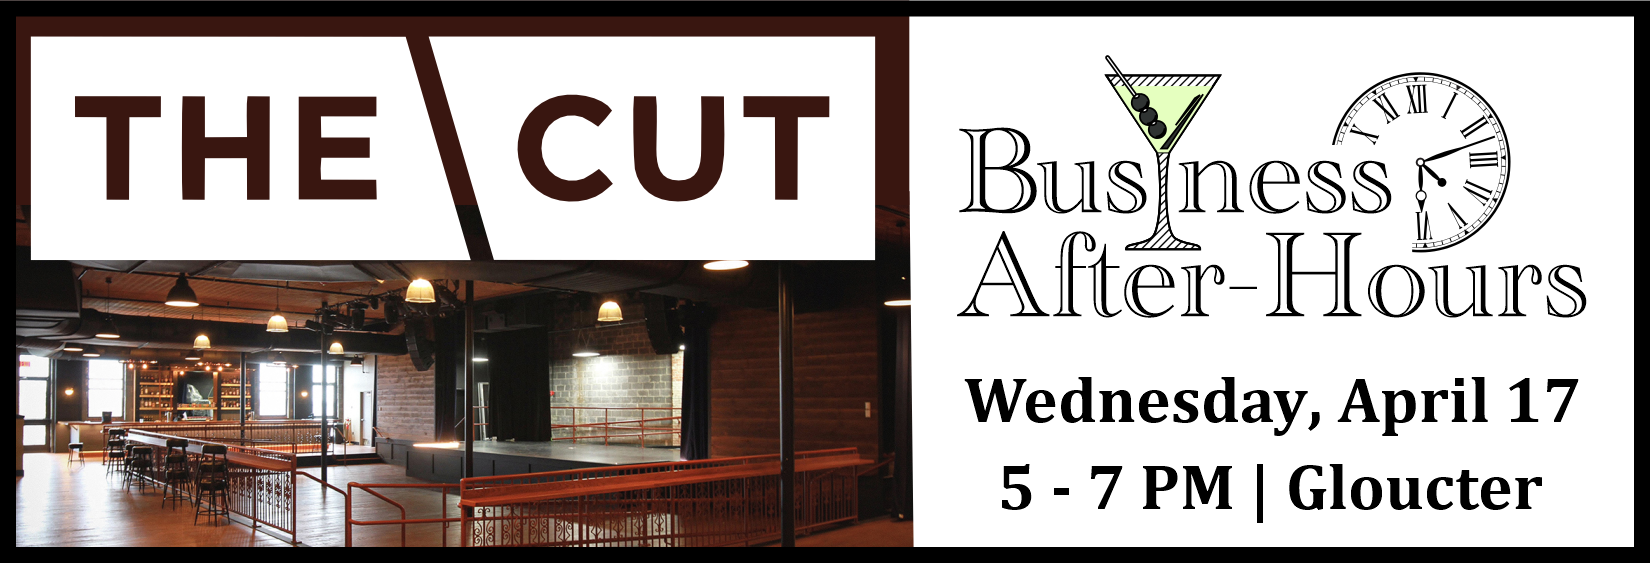 Business After Hours at The Cut